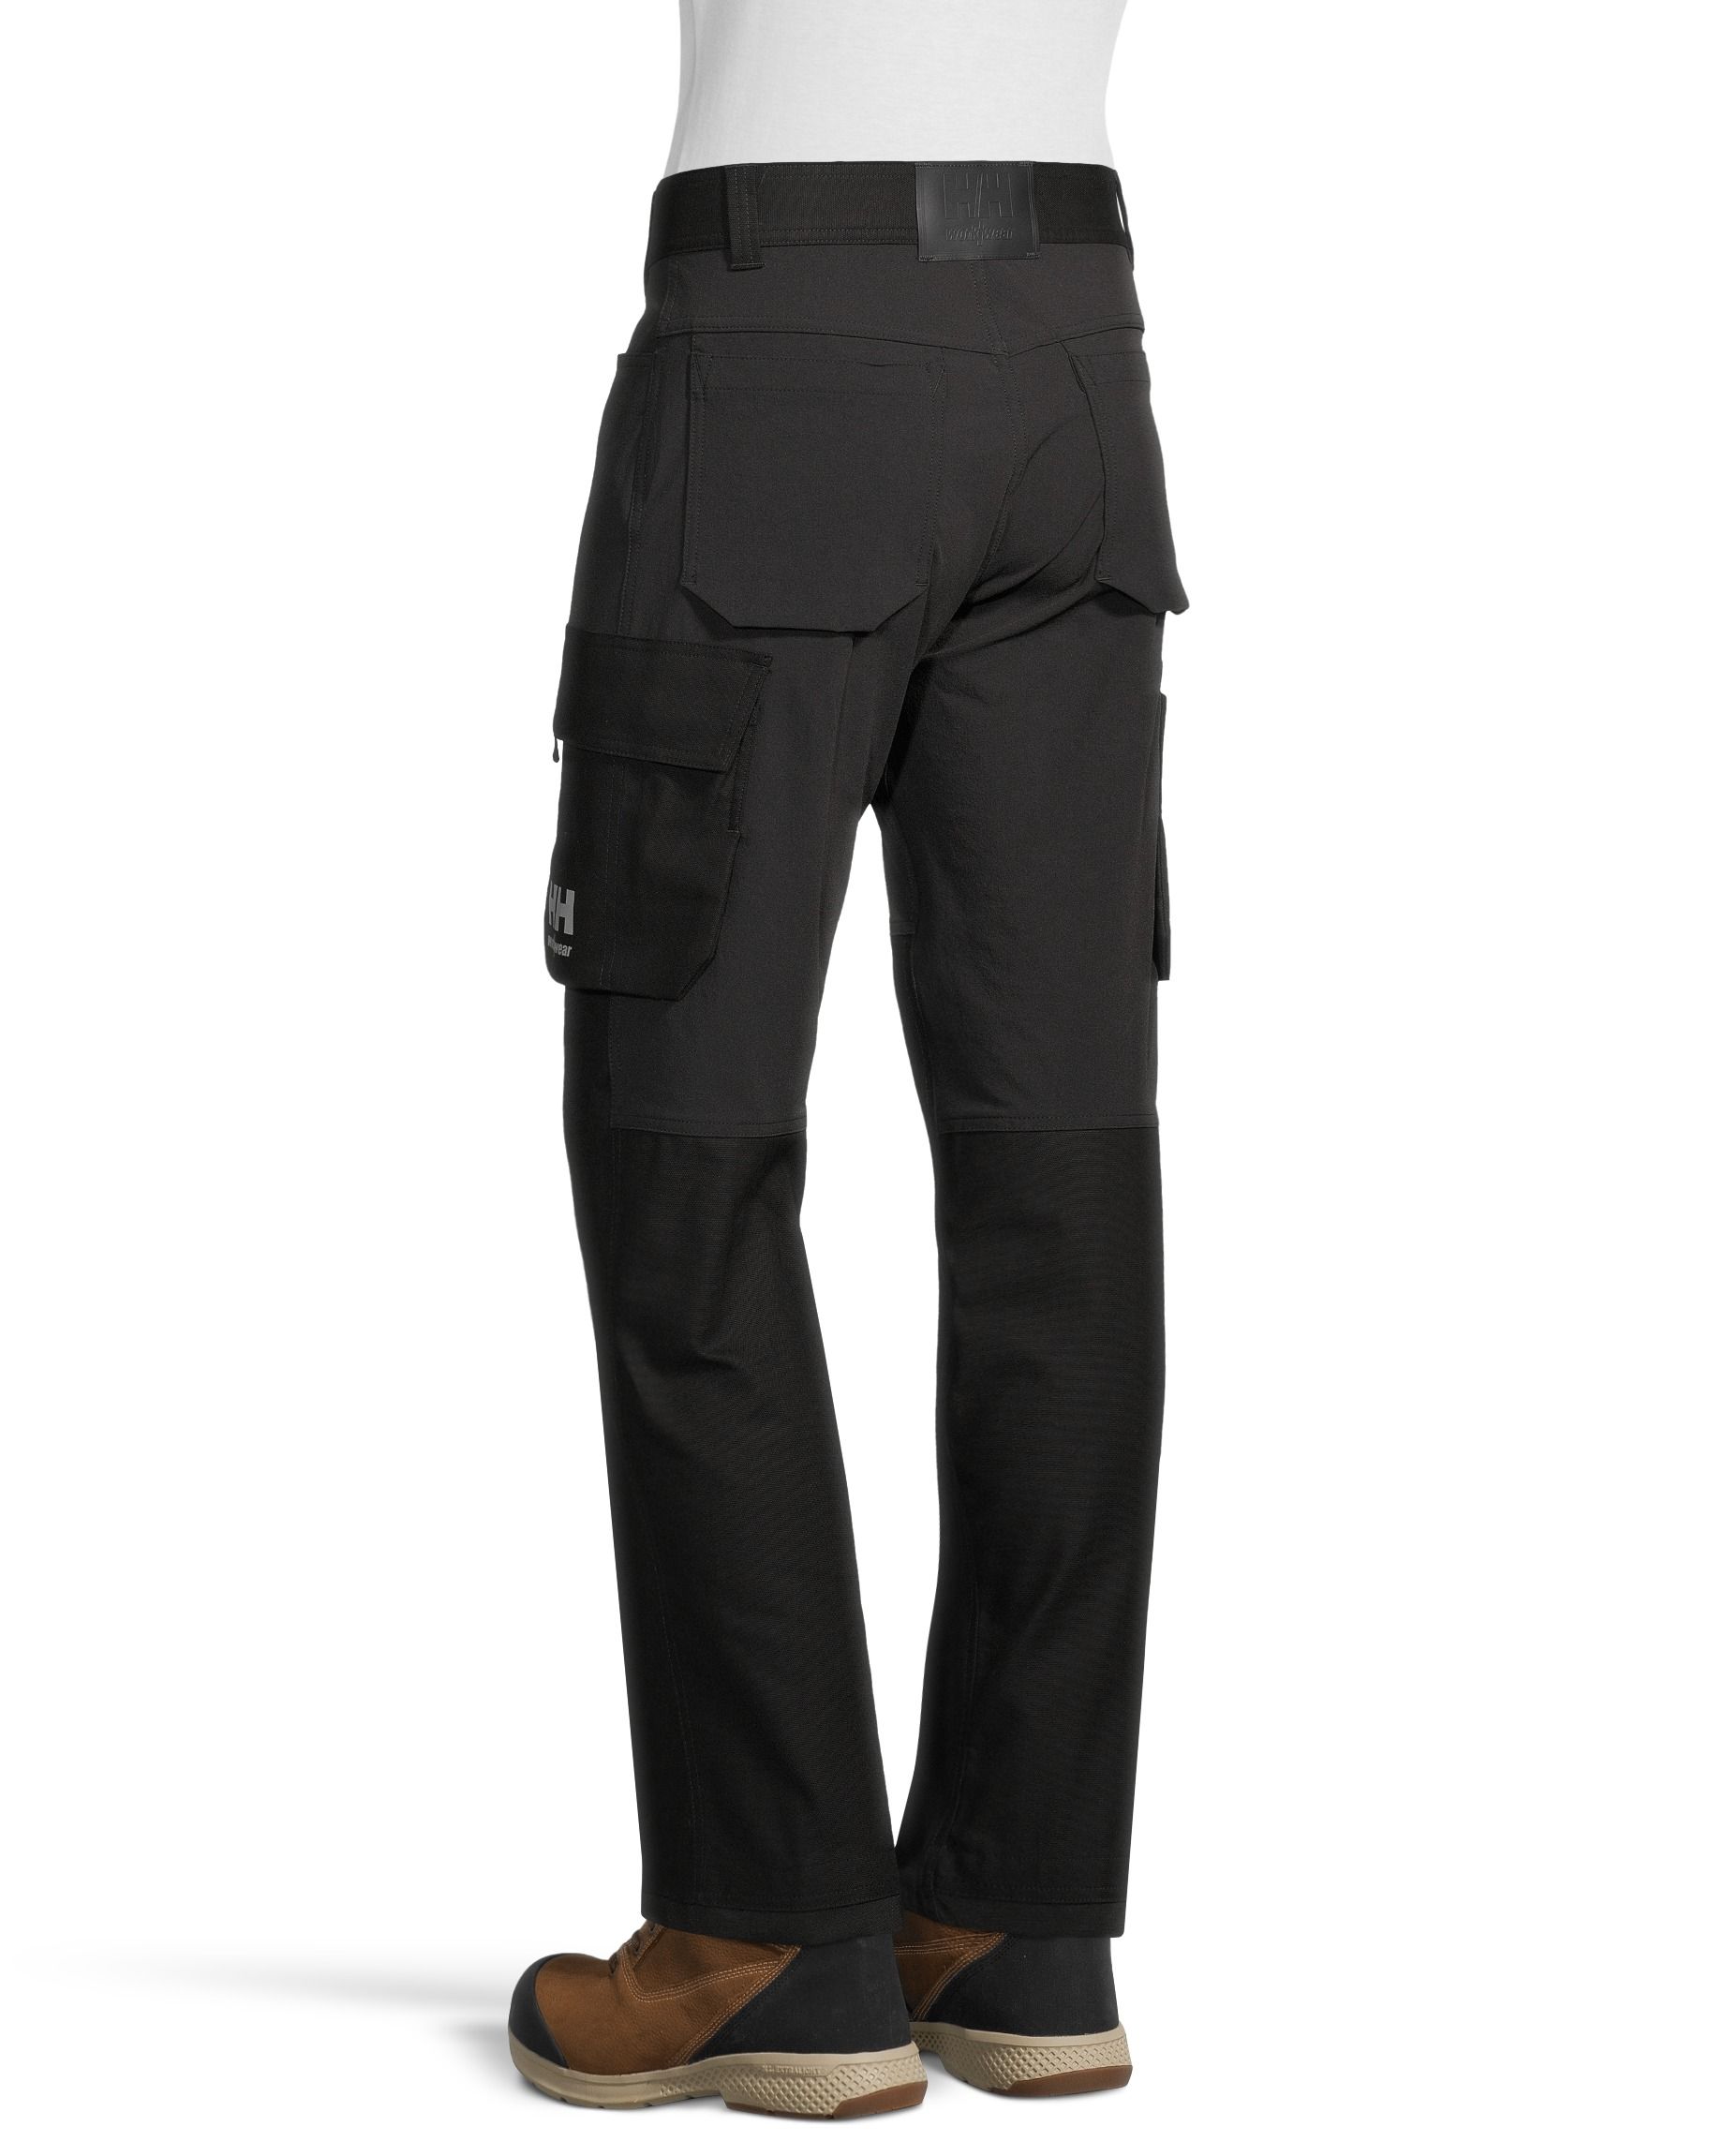 Manchester Service Pant Na, HH Workwear CA